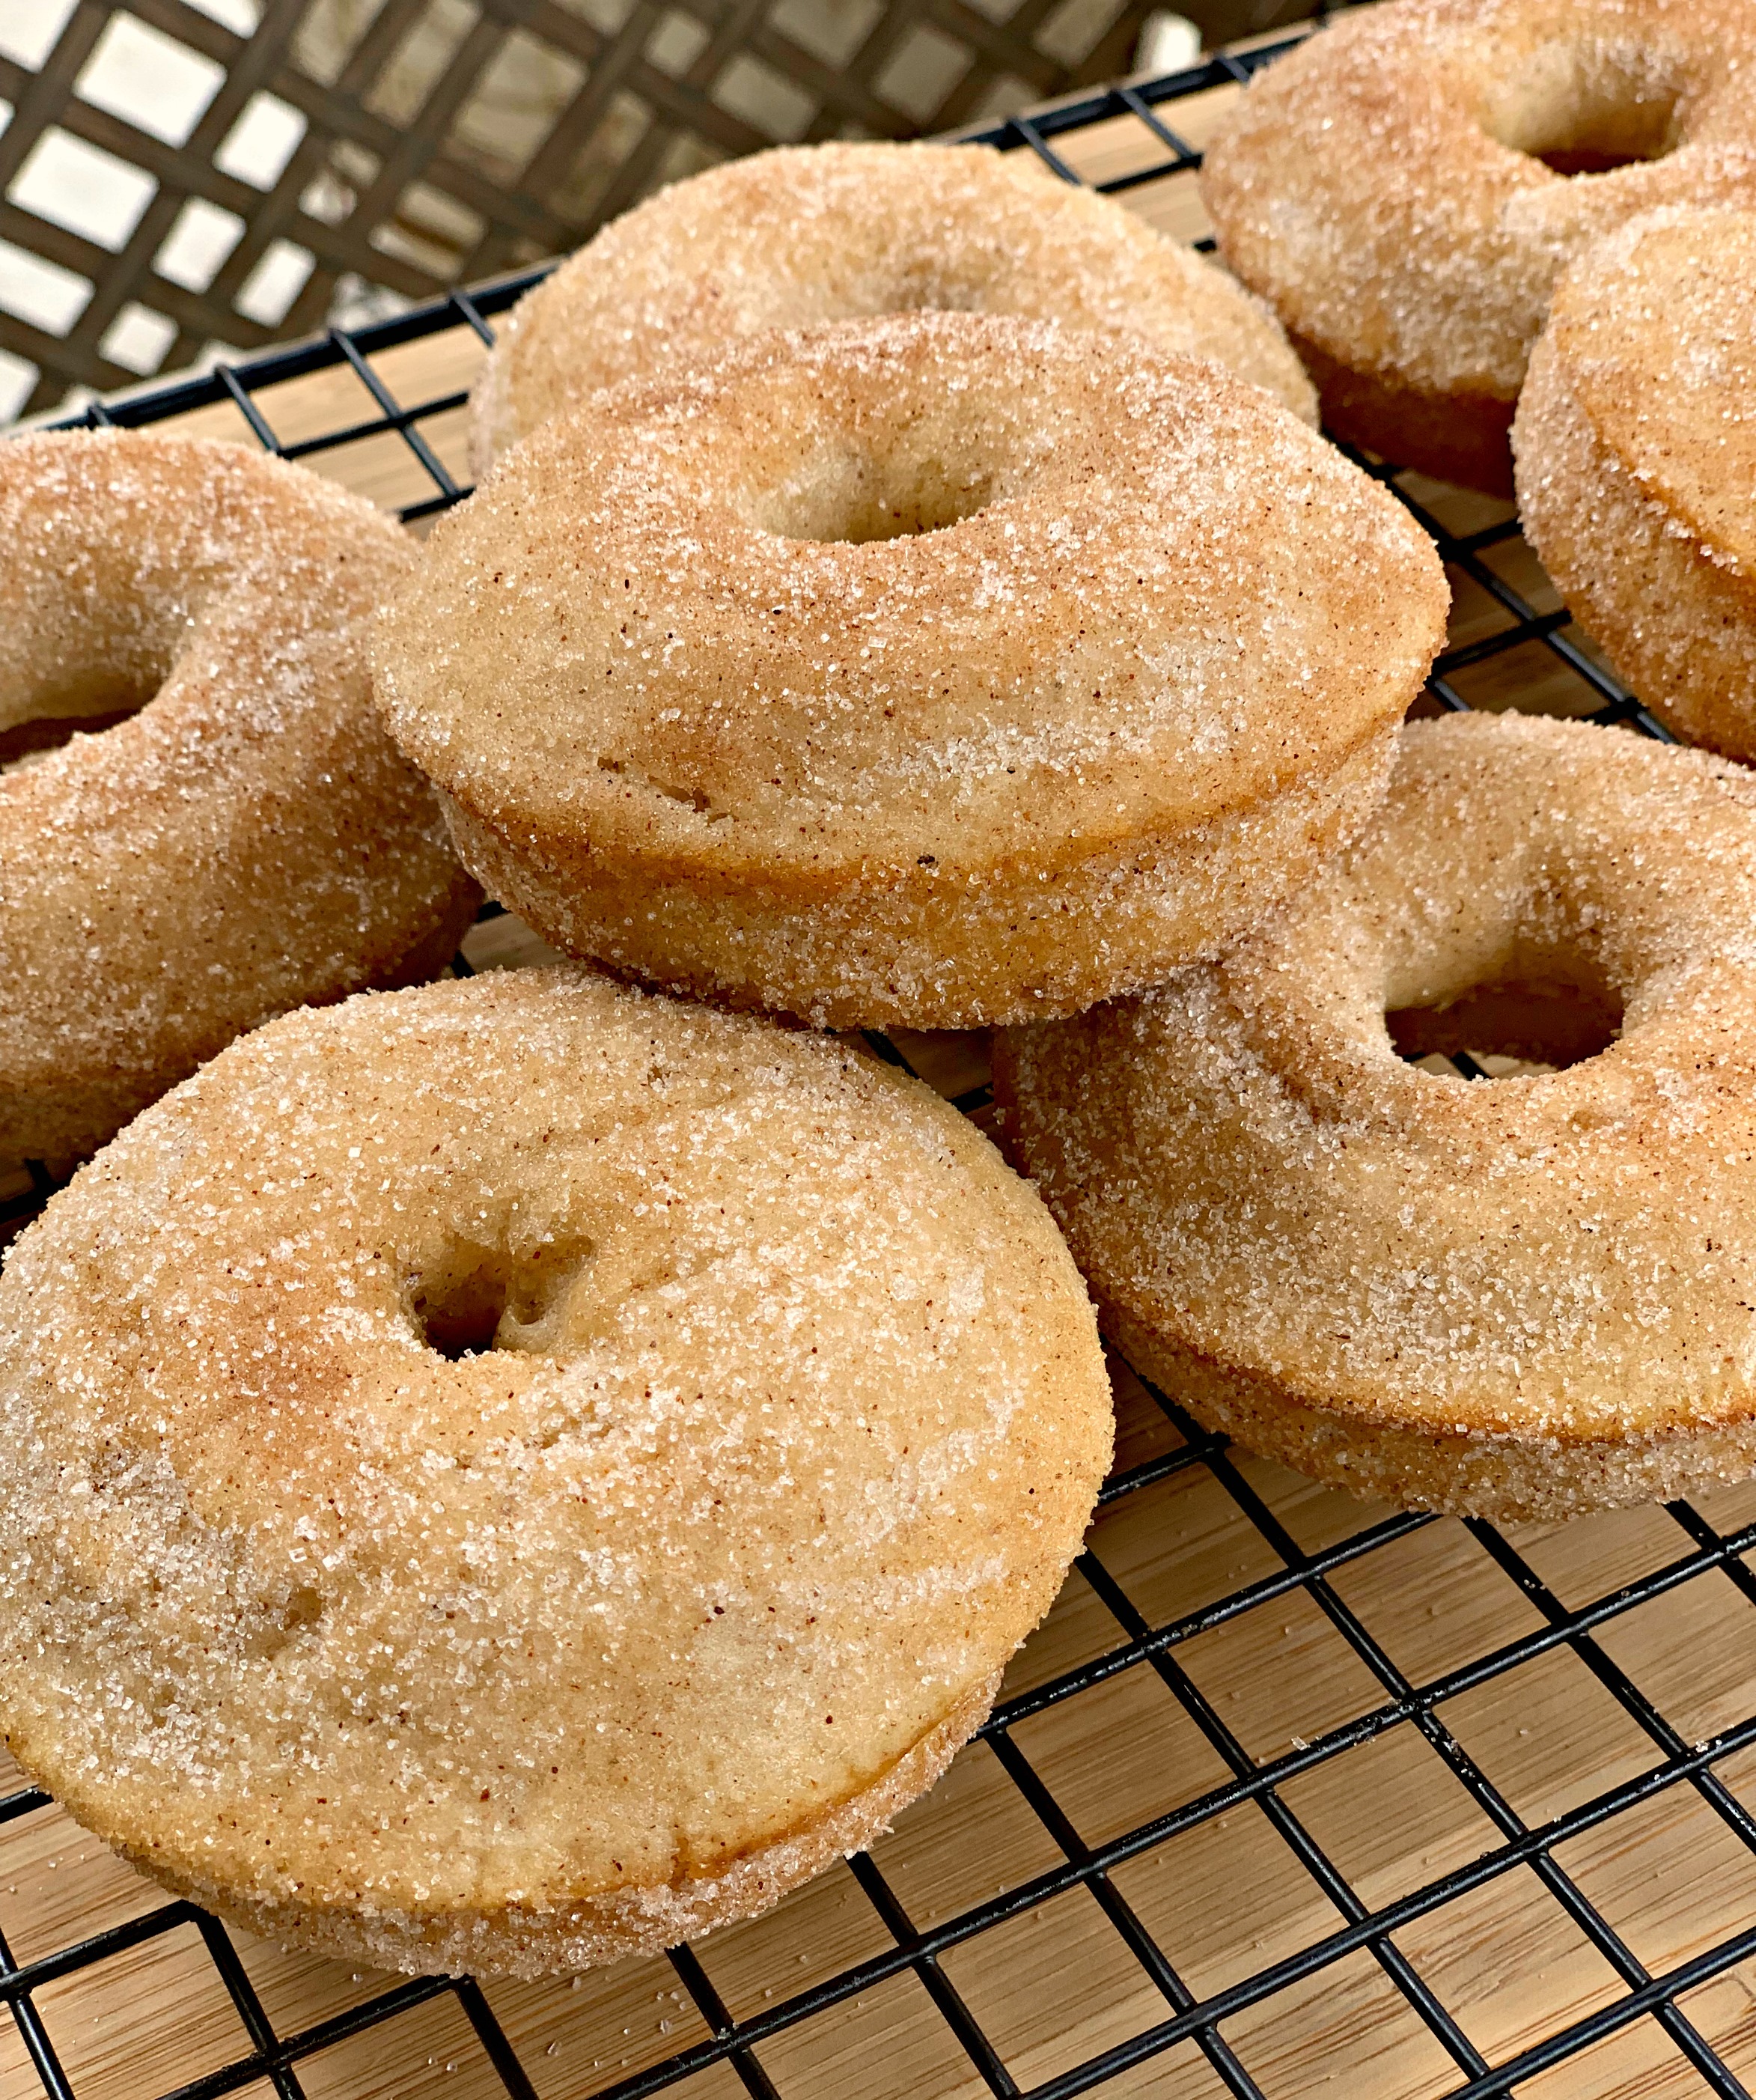 Baked Mini Donuts with Cinnamon Sugar - Cooking Classy